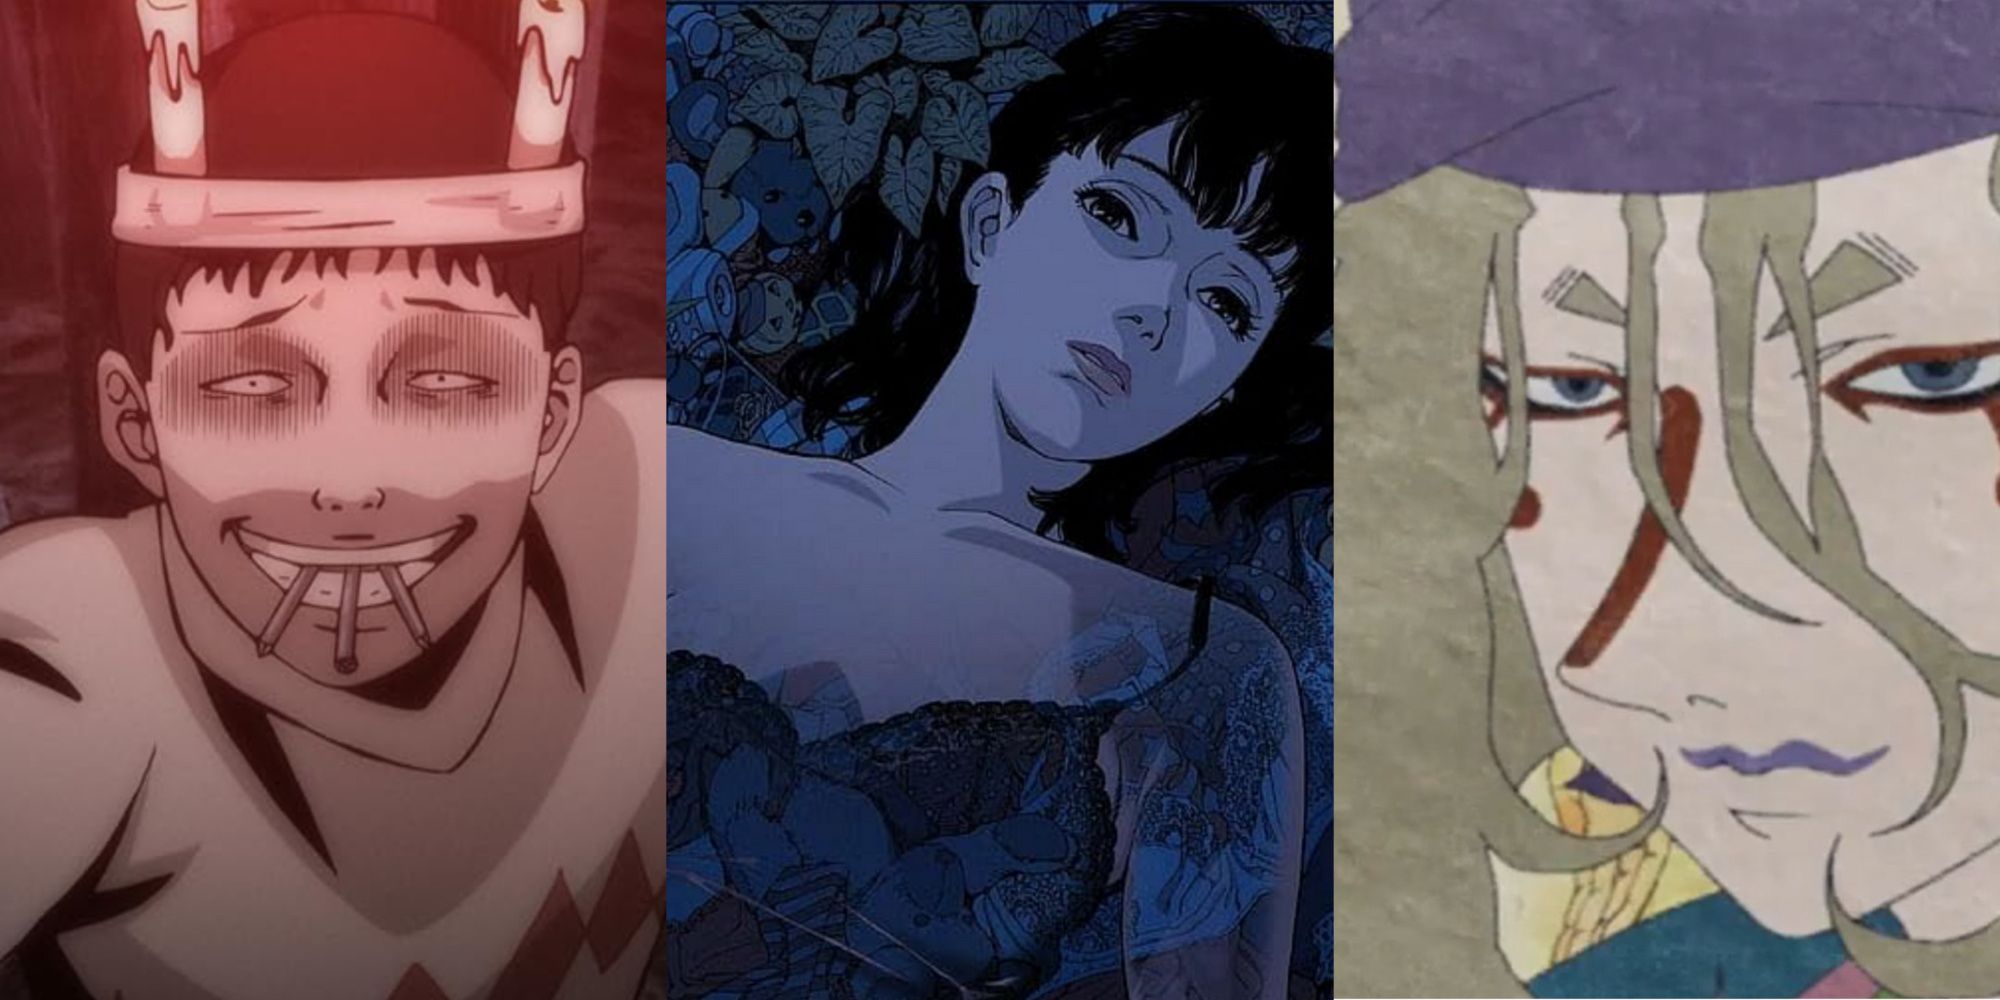 souichi Tsuiji from the Junji Ito Collection, Mimia Kirigoe from Perfect Blue, and The Medicine Seller from Mononoke